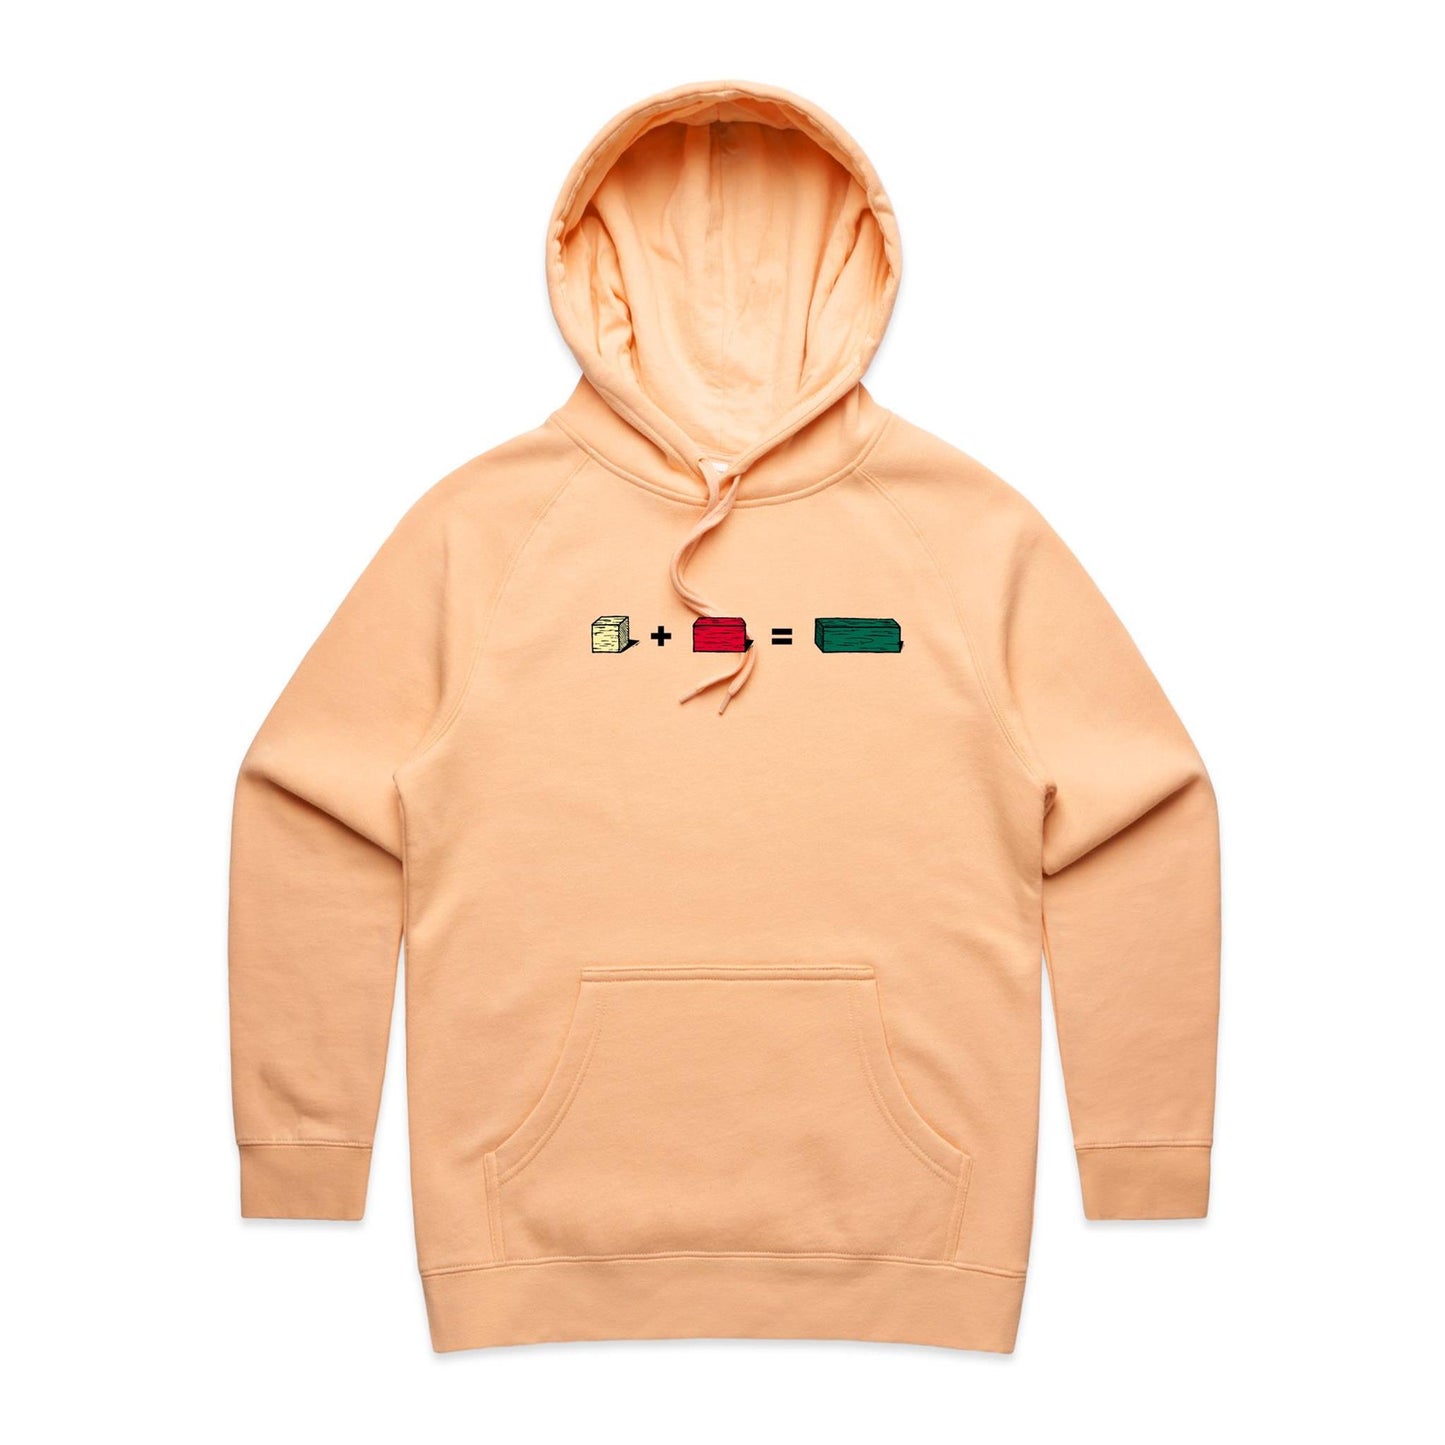 Cuisenaire Rods Hoodies for Women